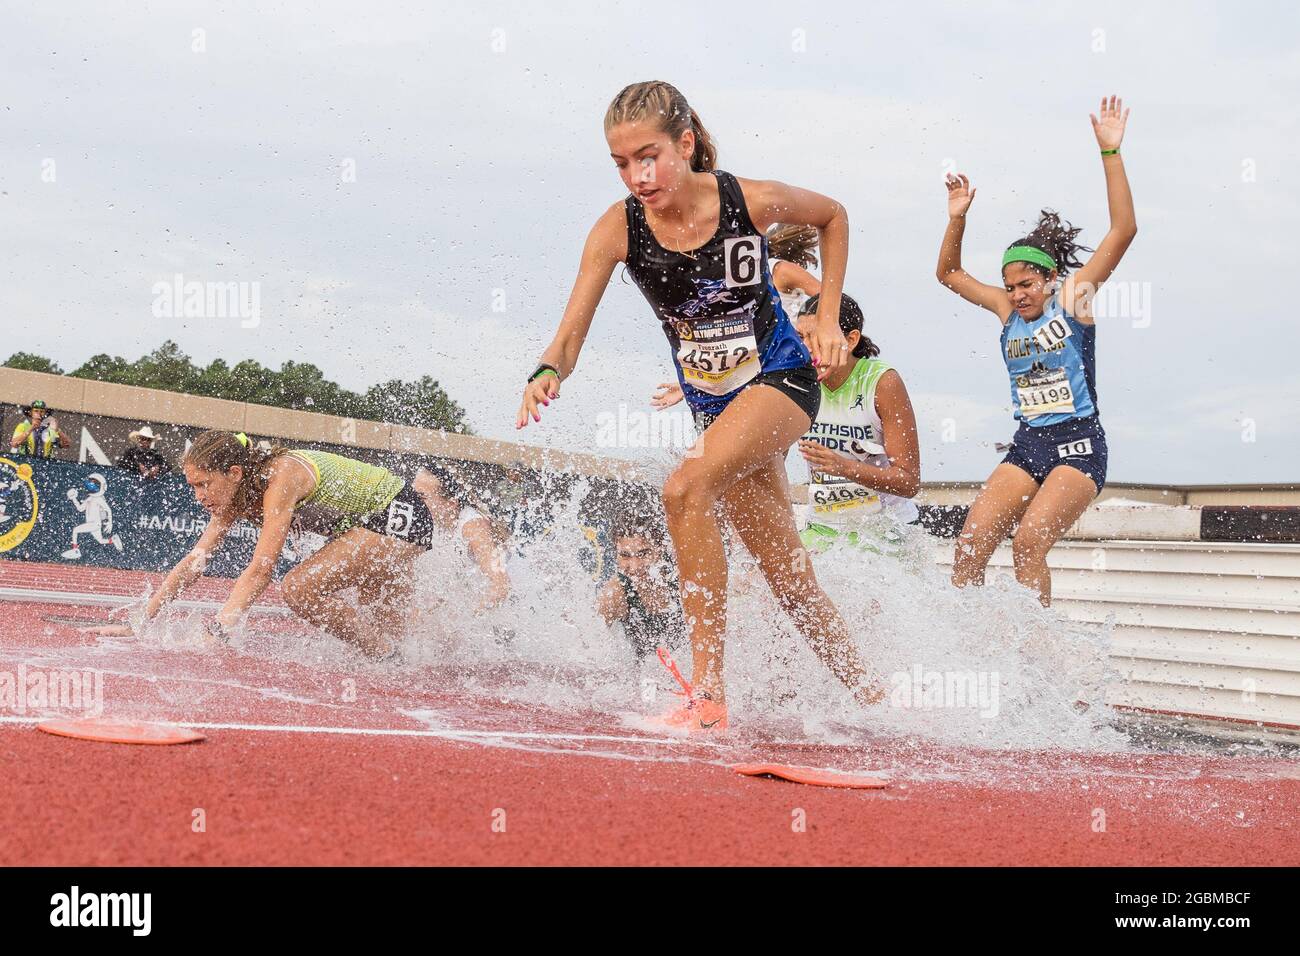 August 4, 2021: Competitors navigate the water hazard during the Girls 2000 Meter Steeplechase 15-16 years old division in the 2021 AAU Junior Olympic Games at George Turner Stadium in Houston, Texas. Prentice C. James/CSM Stock Photo